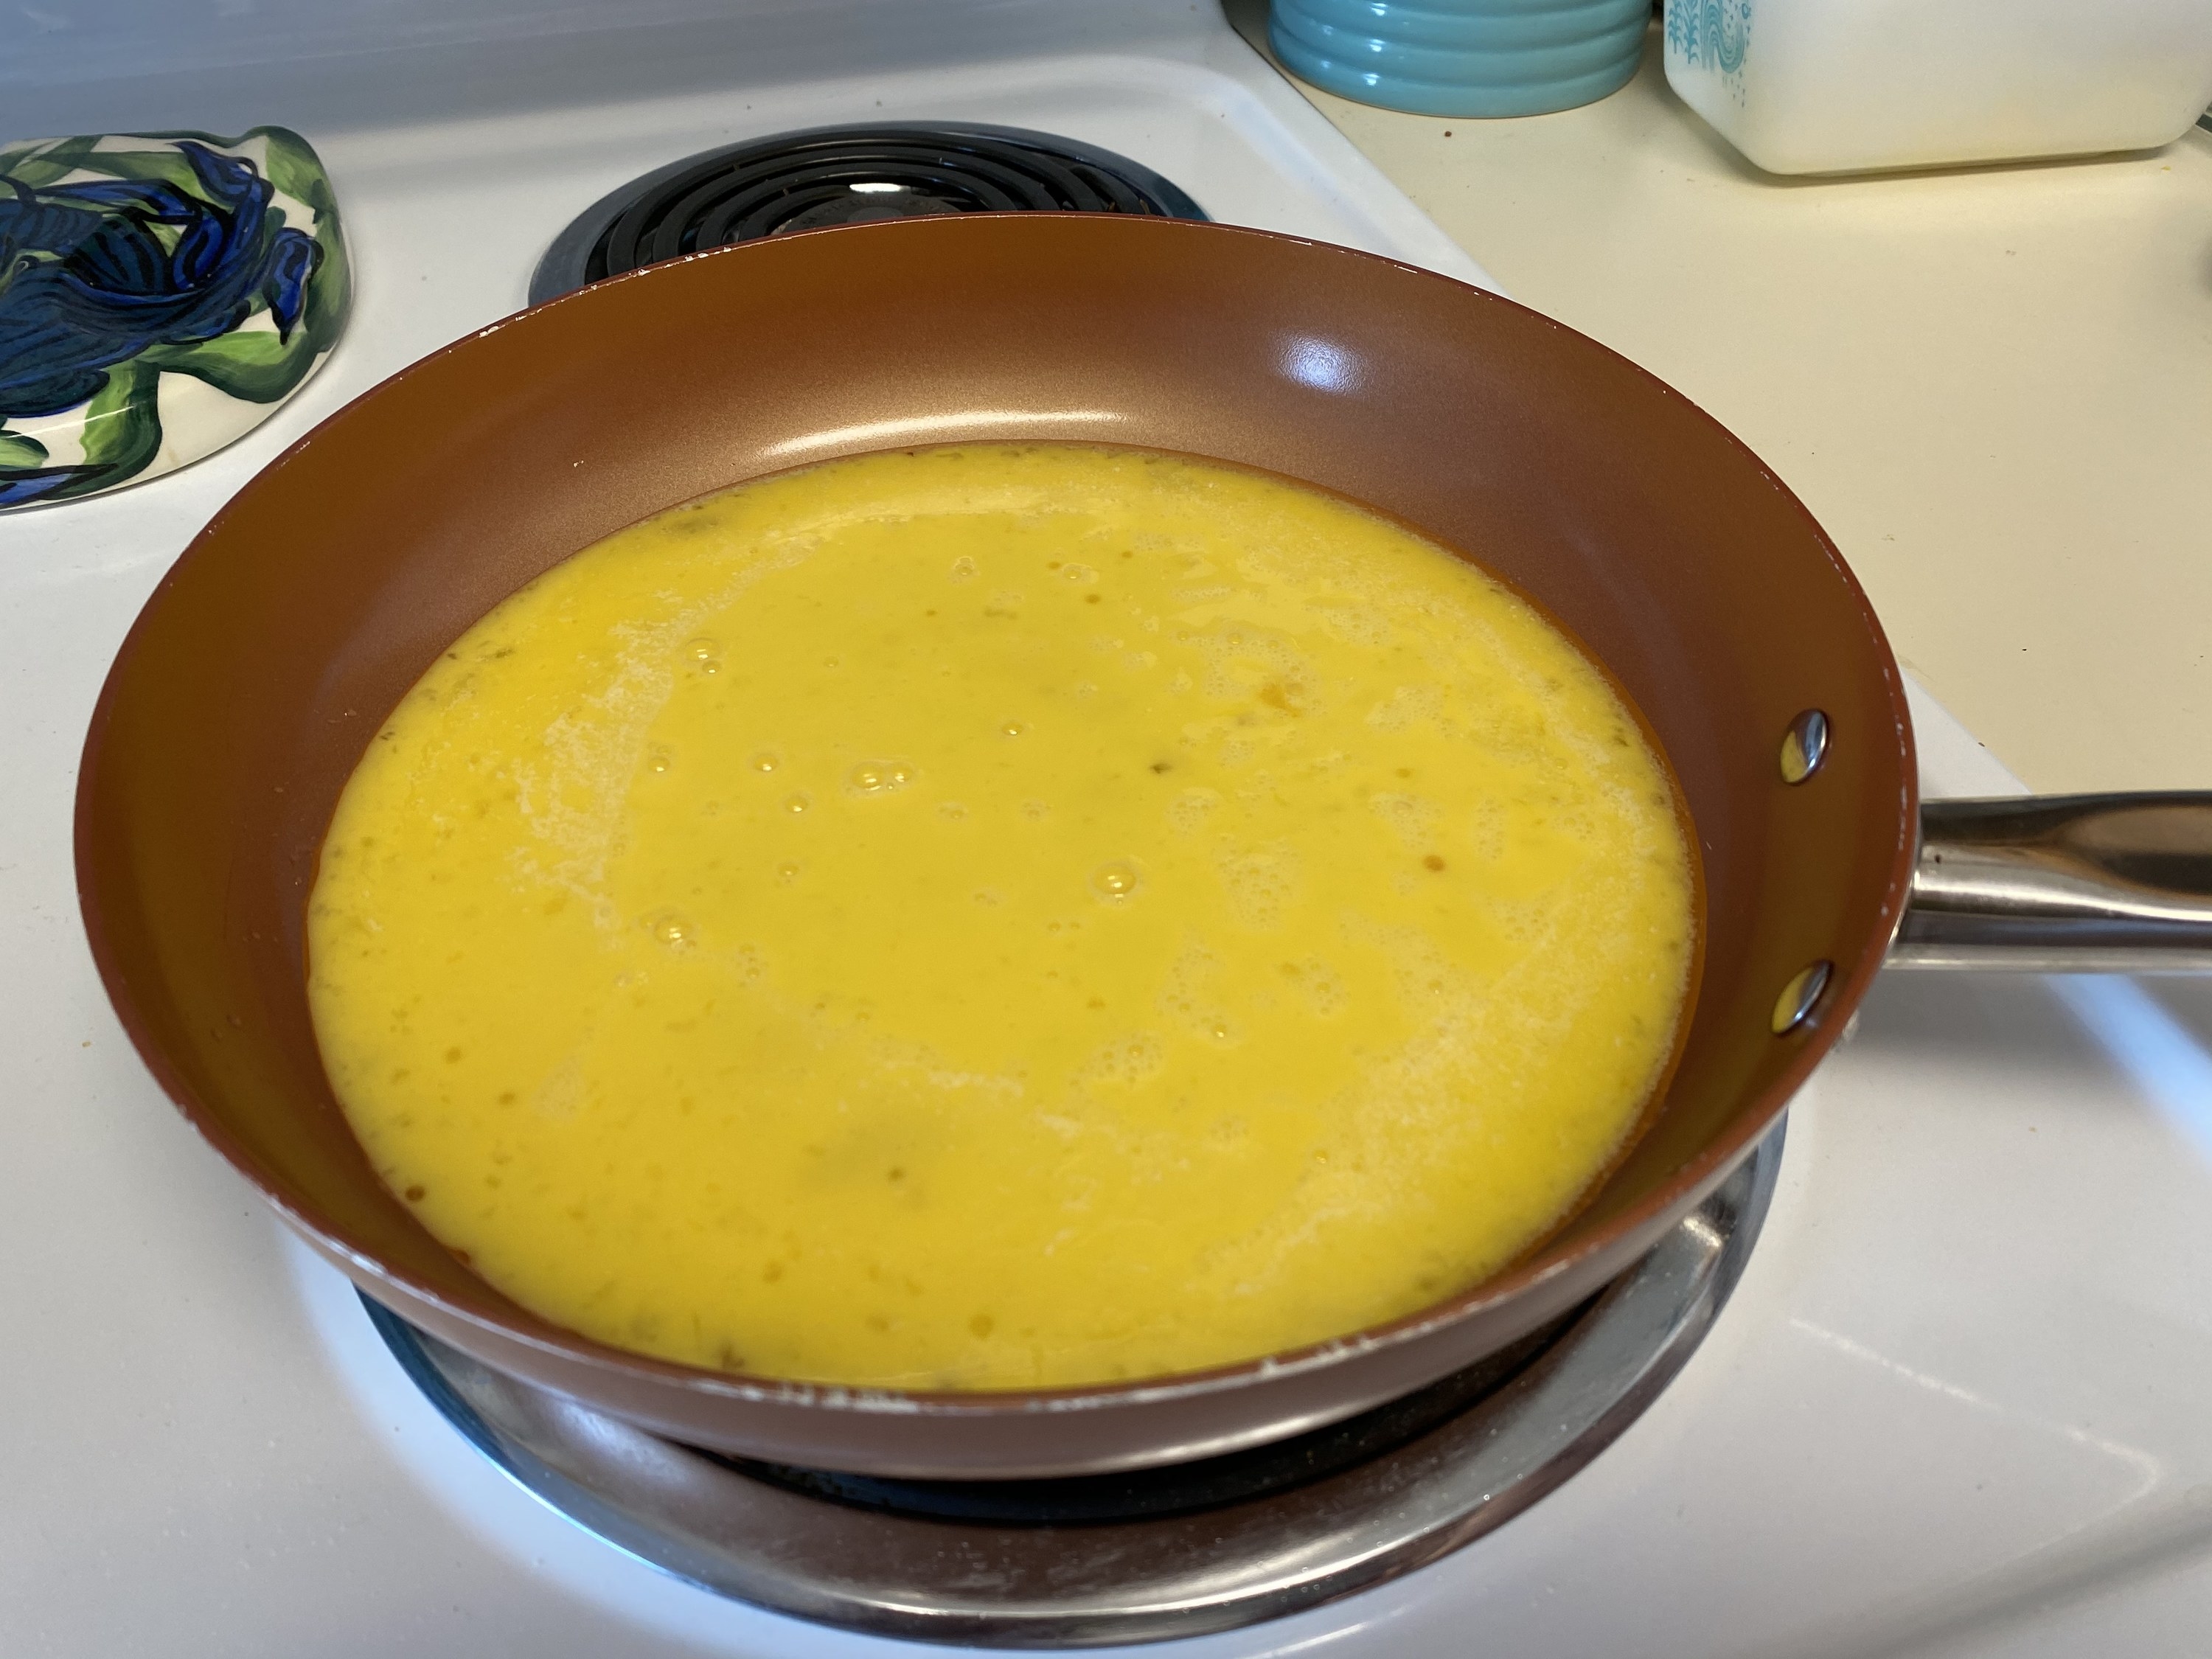 Pan filled with raw eggs, about to be cooked